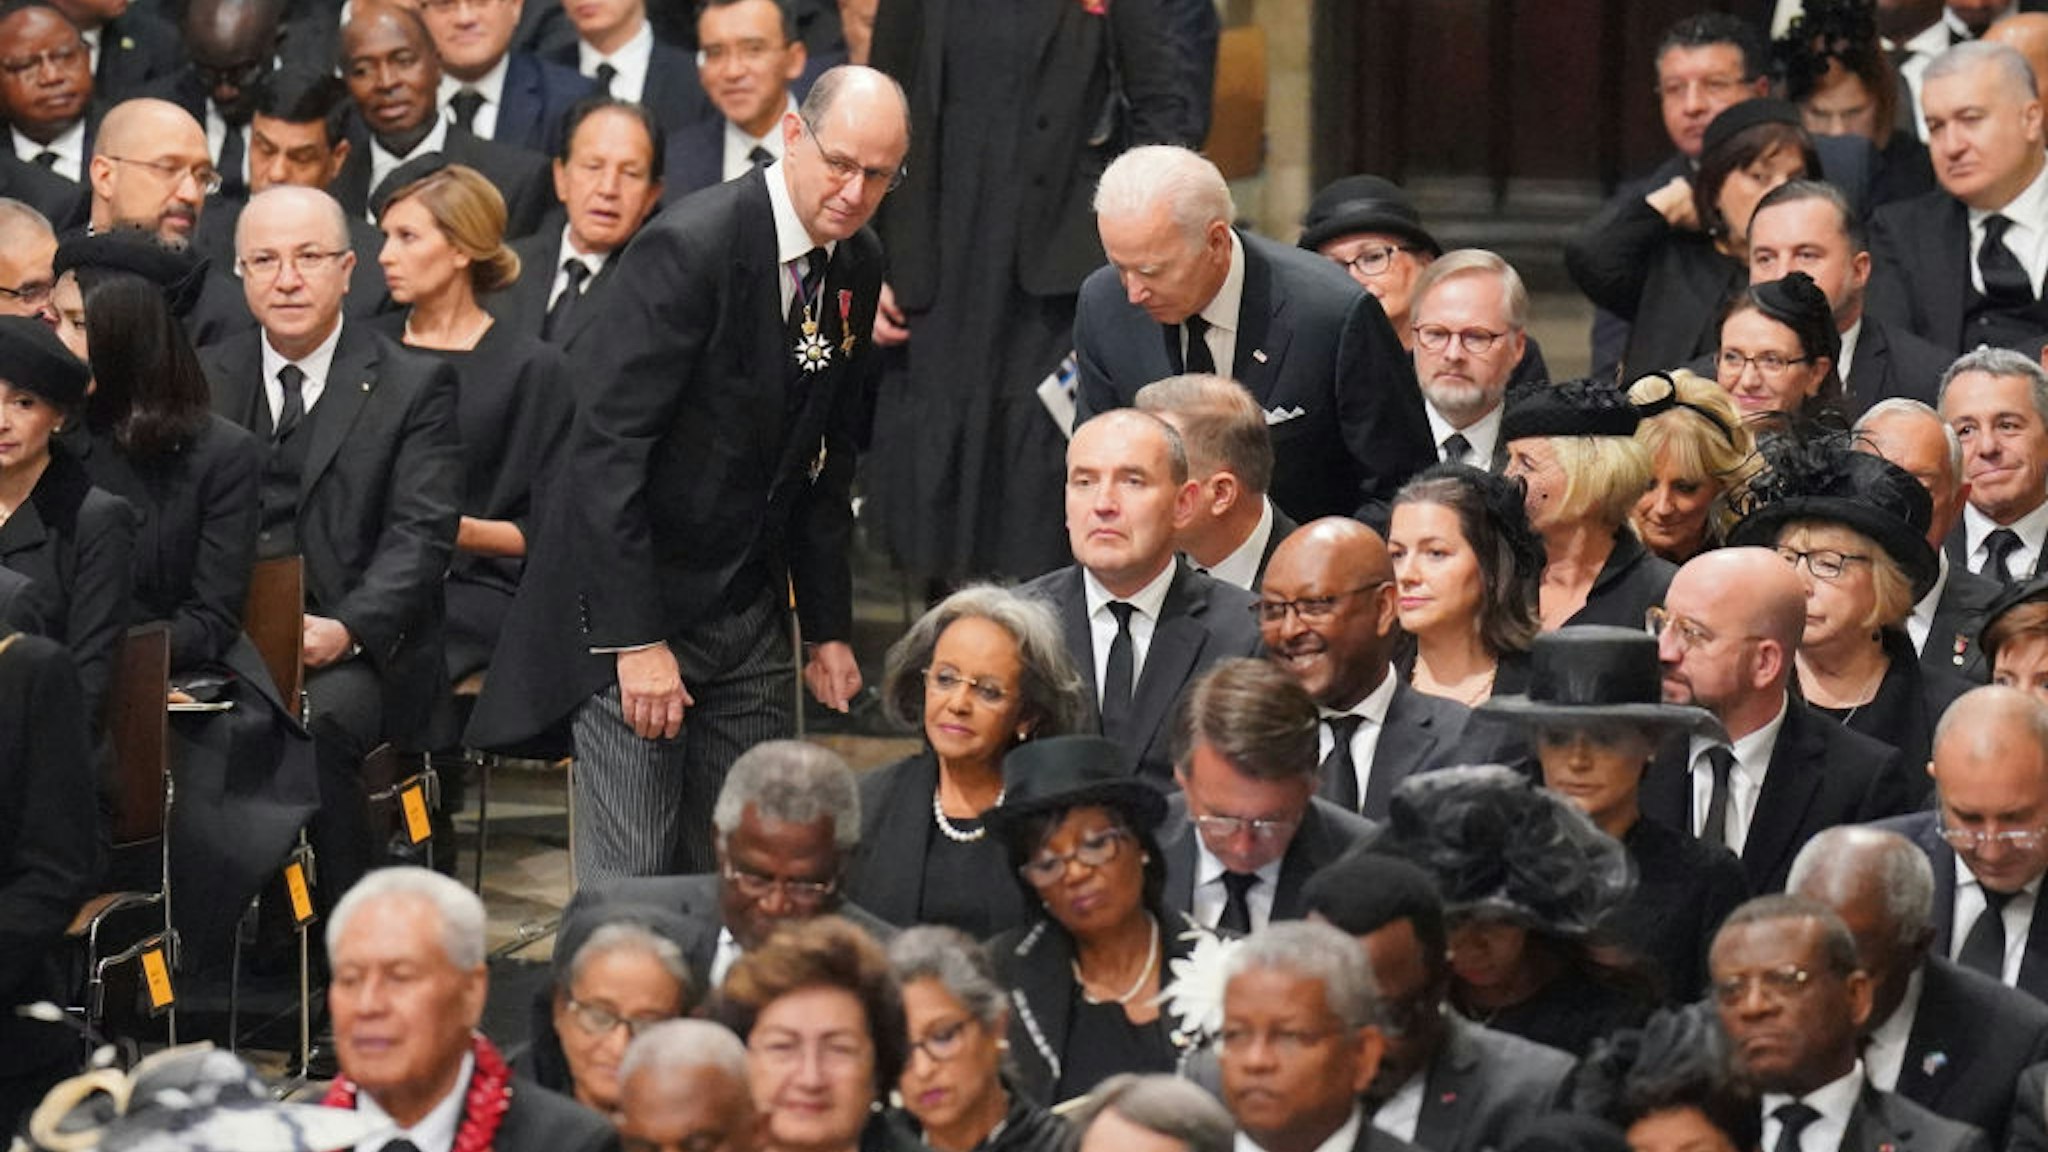 LONDON, ENGLAND - SEPTEMBER 19: US President Joe Biden takes his seats with other heads of state and dignitaries at the State Funeral of Queen Elizabeth II, held at Westminster Abbey, on September 19, 2022 in London, England. Elizabeth Alexandra Mary Windsor was born in Bruton Street, Mayfair, London on 21 April 1926. She married Prince Philip in 1947 and ascended the throne of the United Kingdom and Commonwealth on 6 February 1952 after the death of her Father, King George VI. Queen Elizabeth II died at Balmoral Castle in Scotland on September 8, 2022, and is succeeded by her eldest son, King Charles III. (Photo by